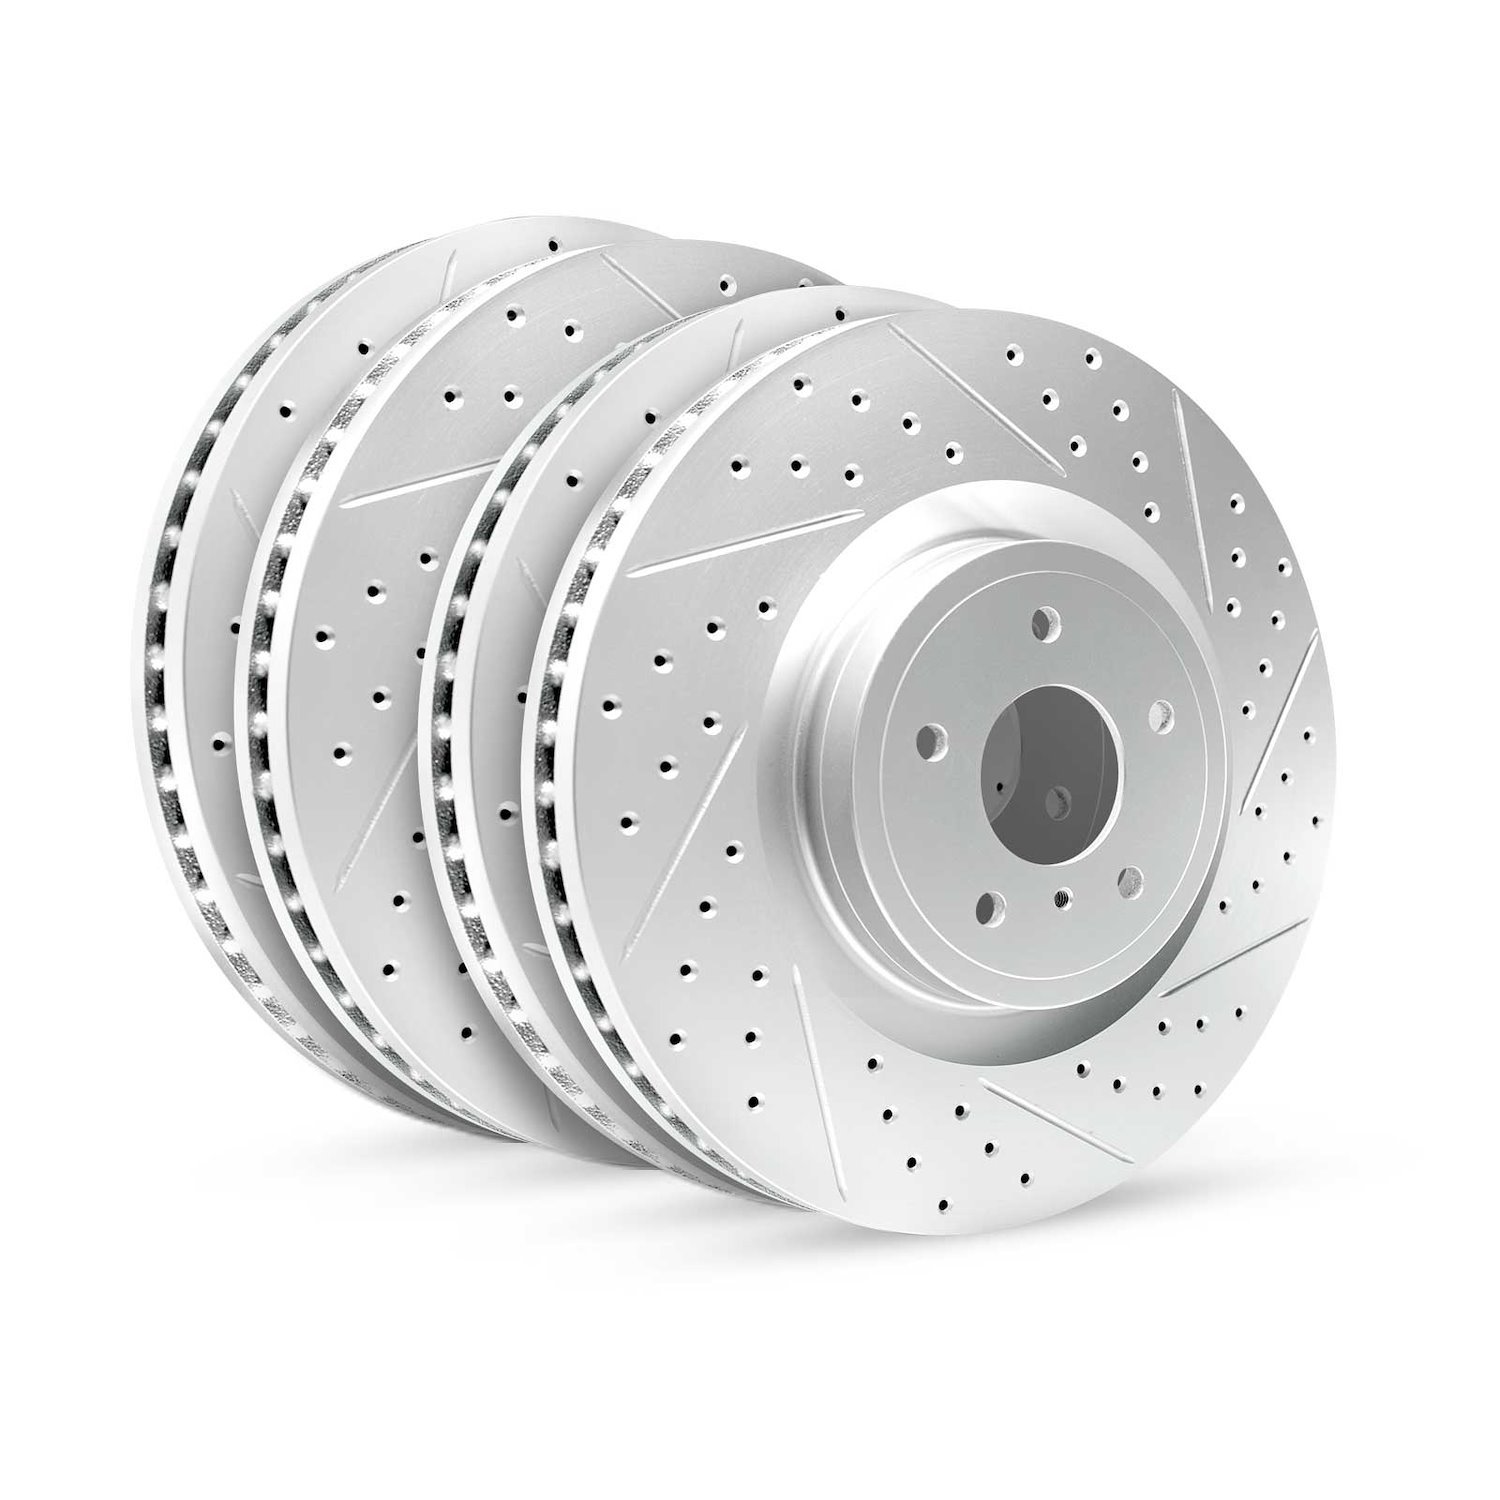 GEO-Carbon Drilled/Slotted Rotors, 1994-2000 Fits Multiple Makes/Models, Position: Front/Rear